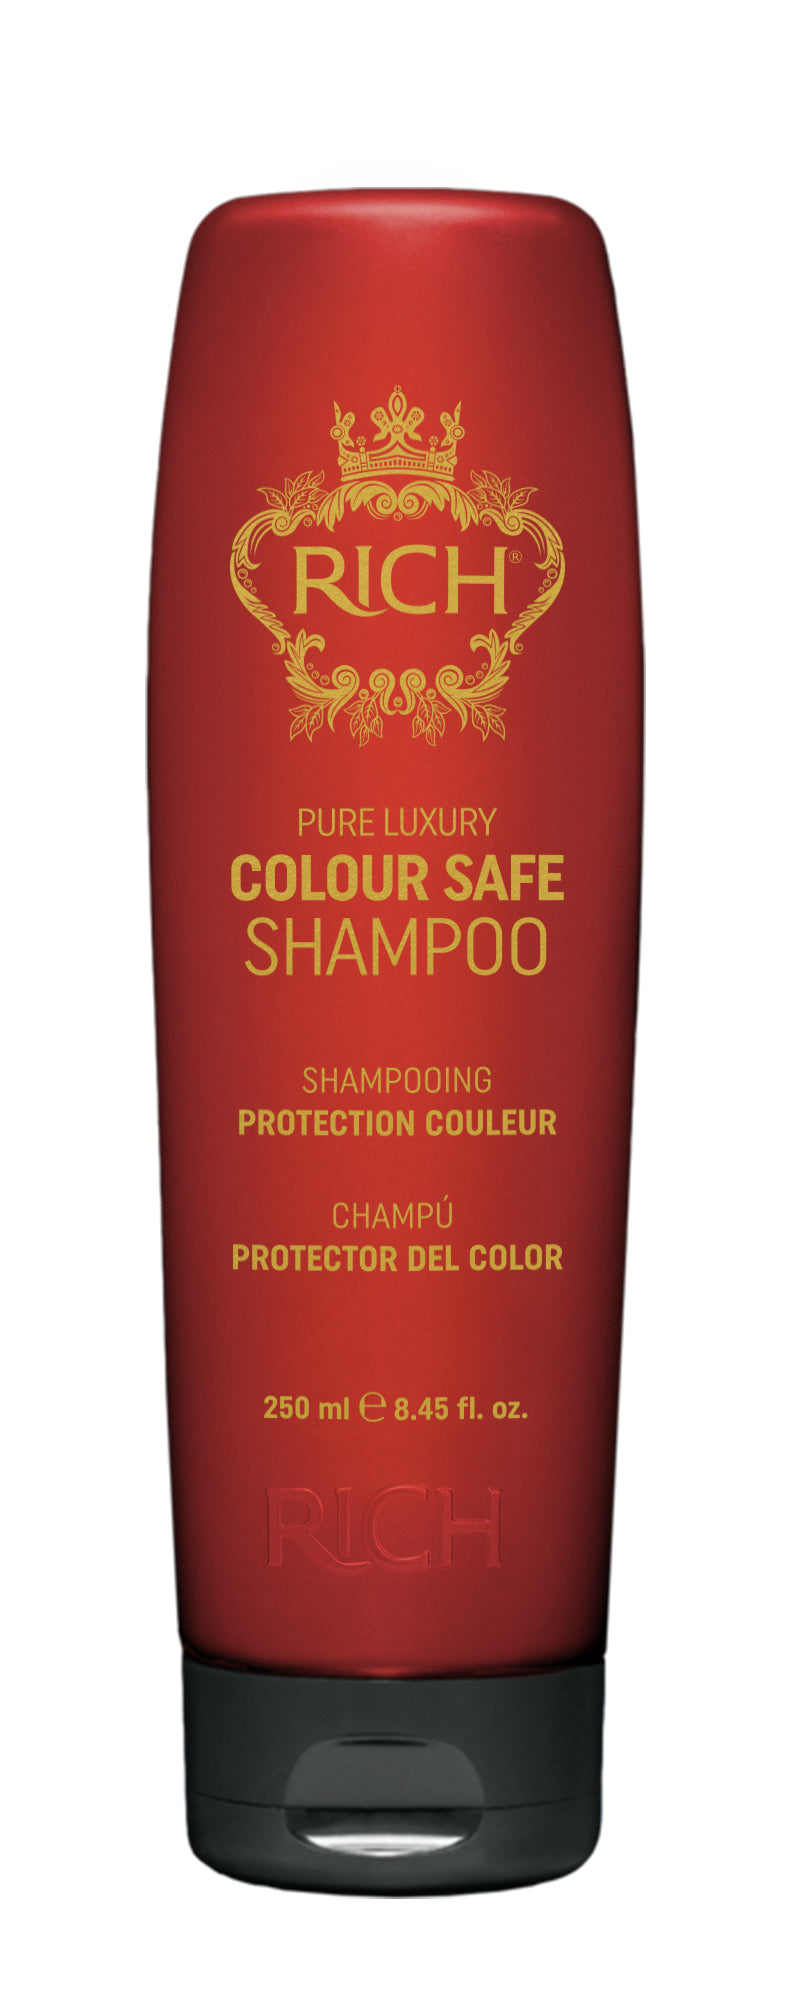 RICH Shampoo for dyed hair